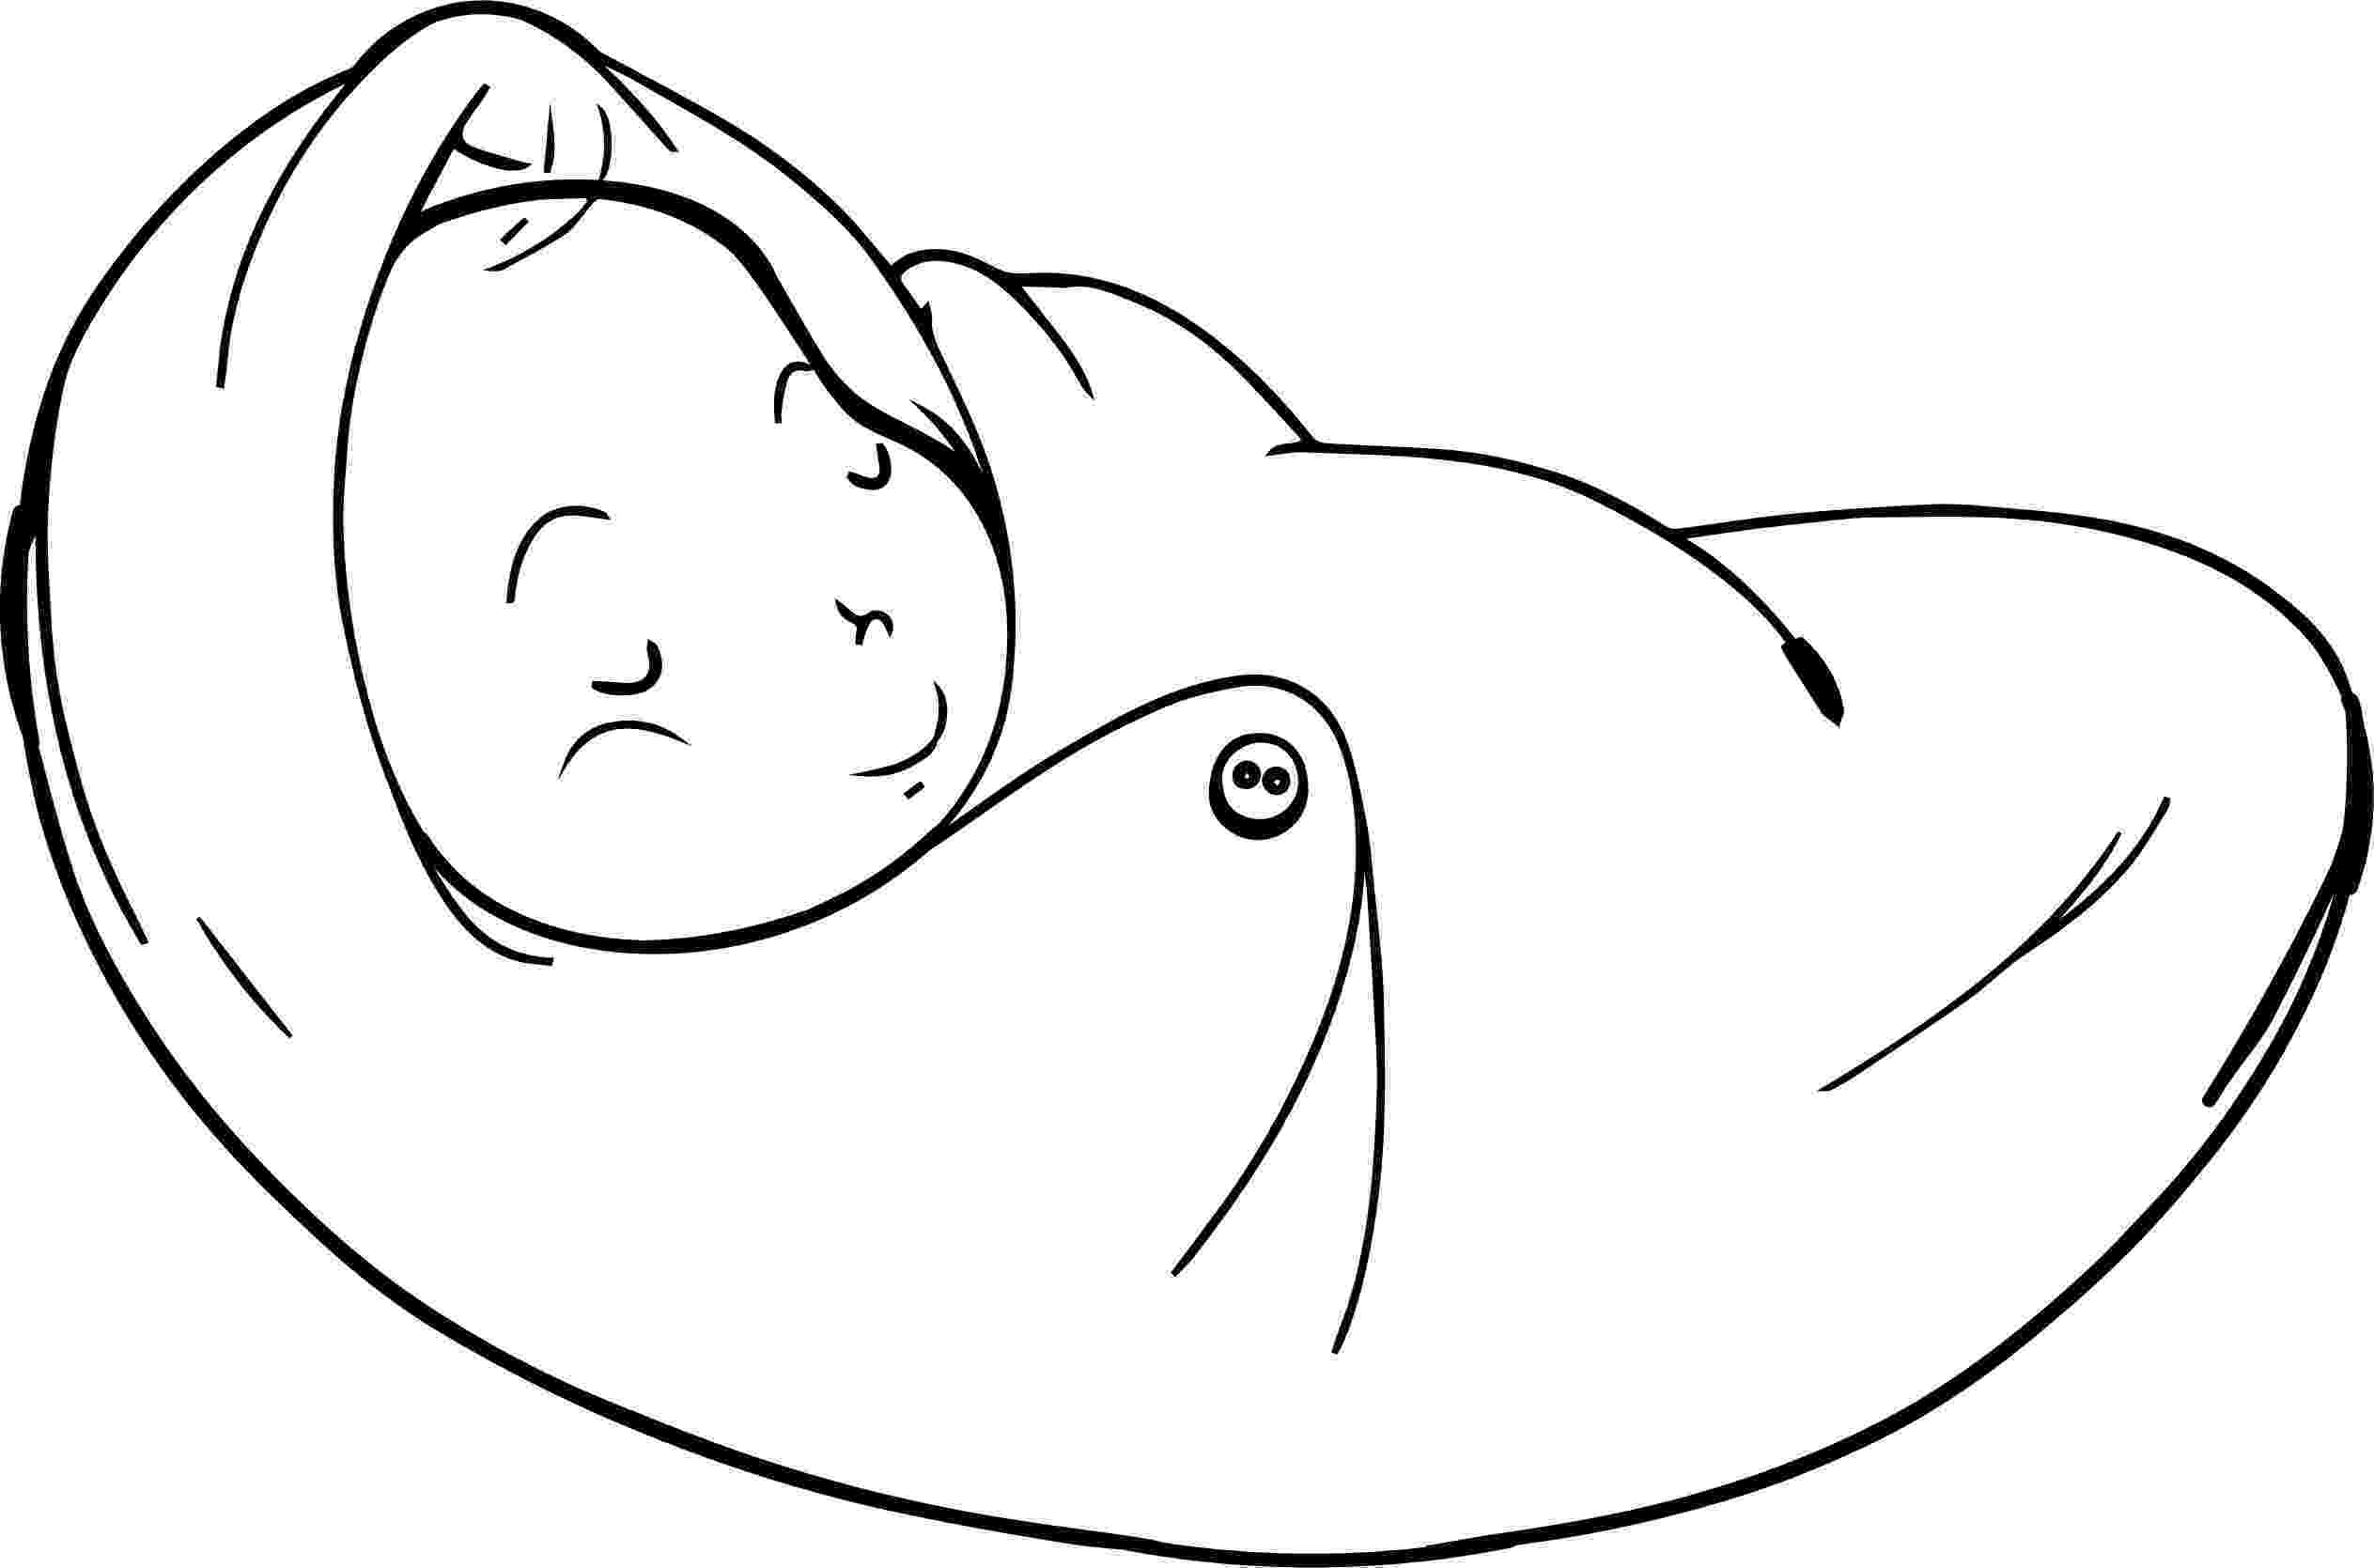 baby pictures coloring pages baby online coloring pages page 1 pictures coloring pages baby 